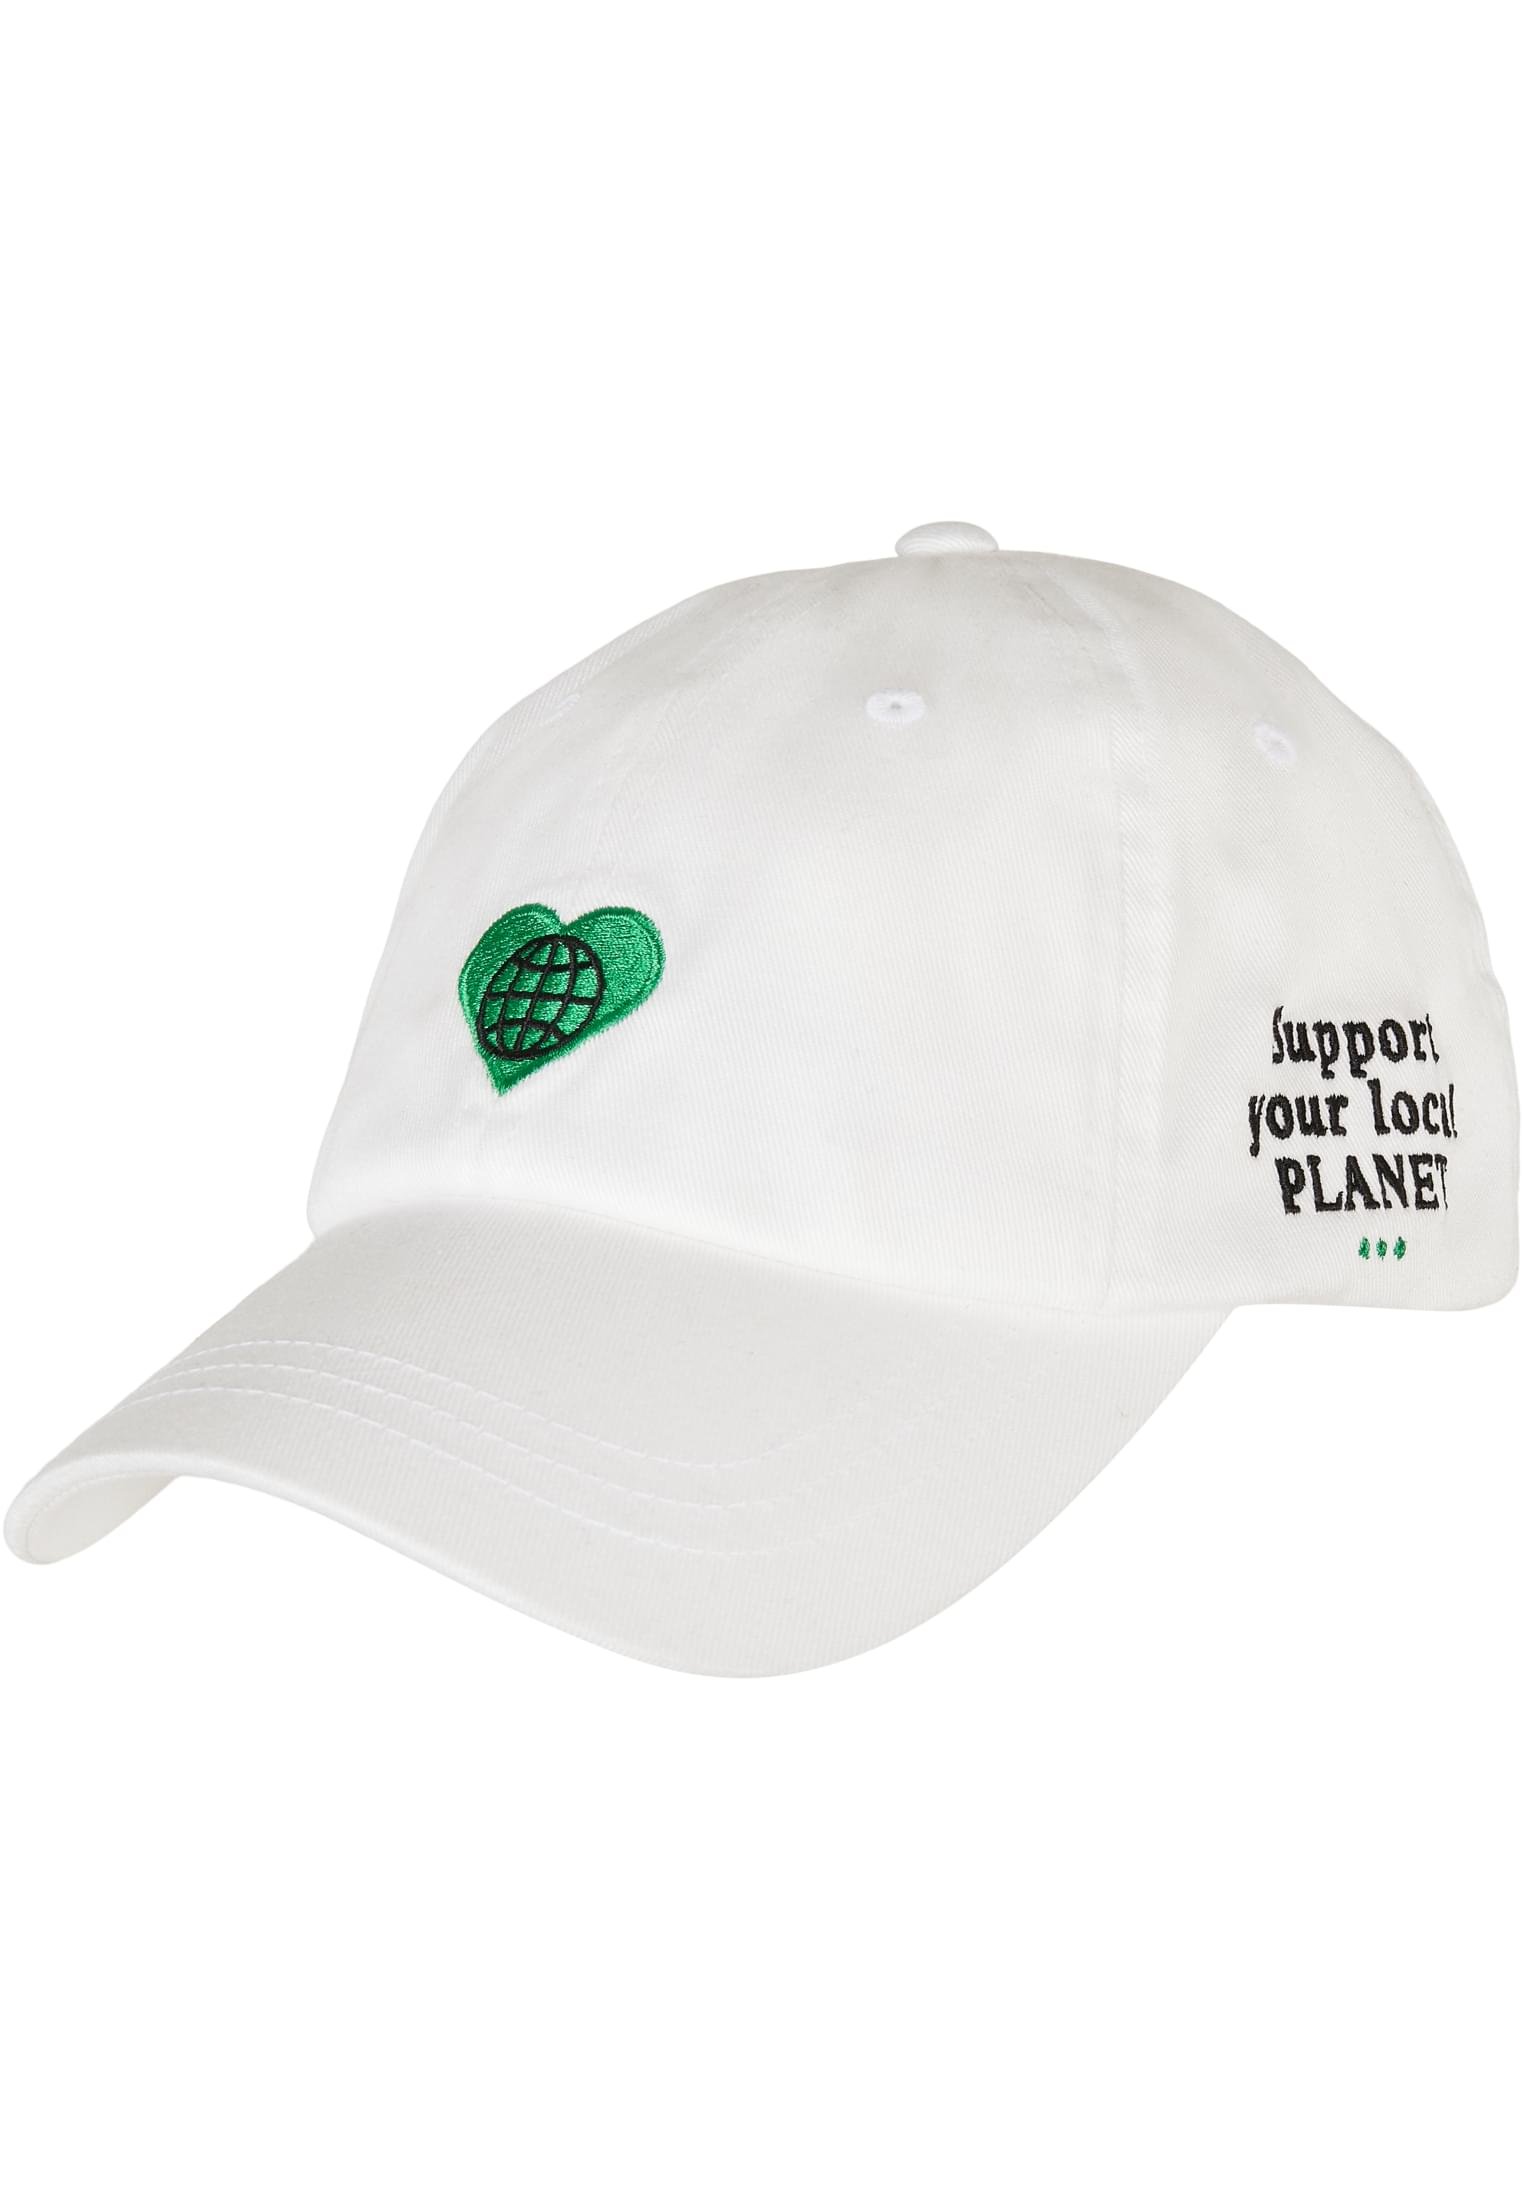 C&S Local Planet Curved Cap white/mc one size